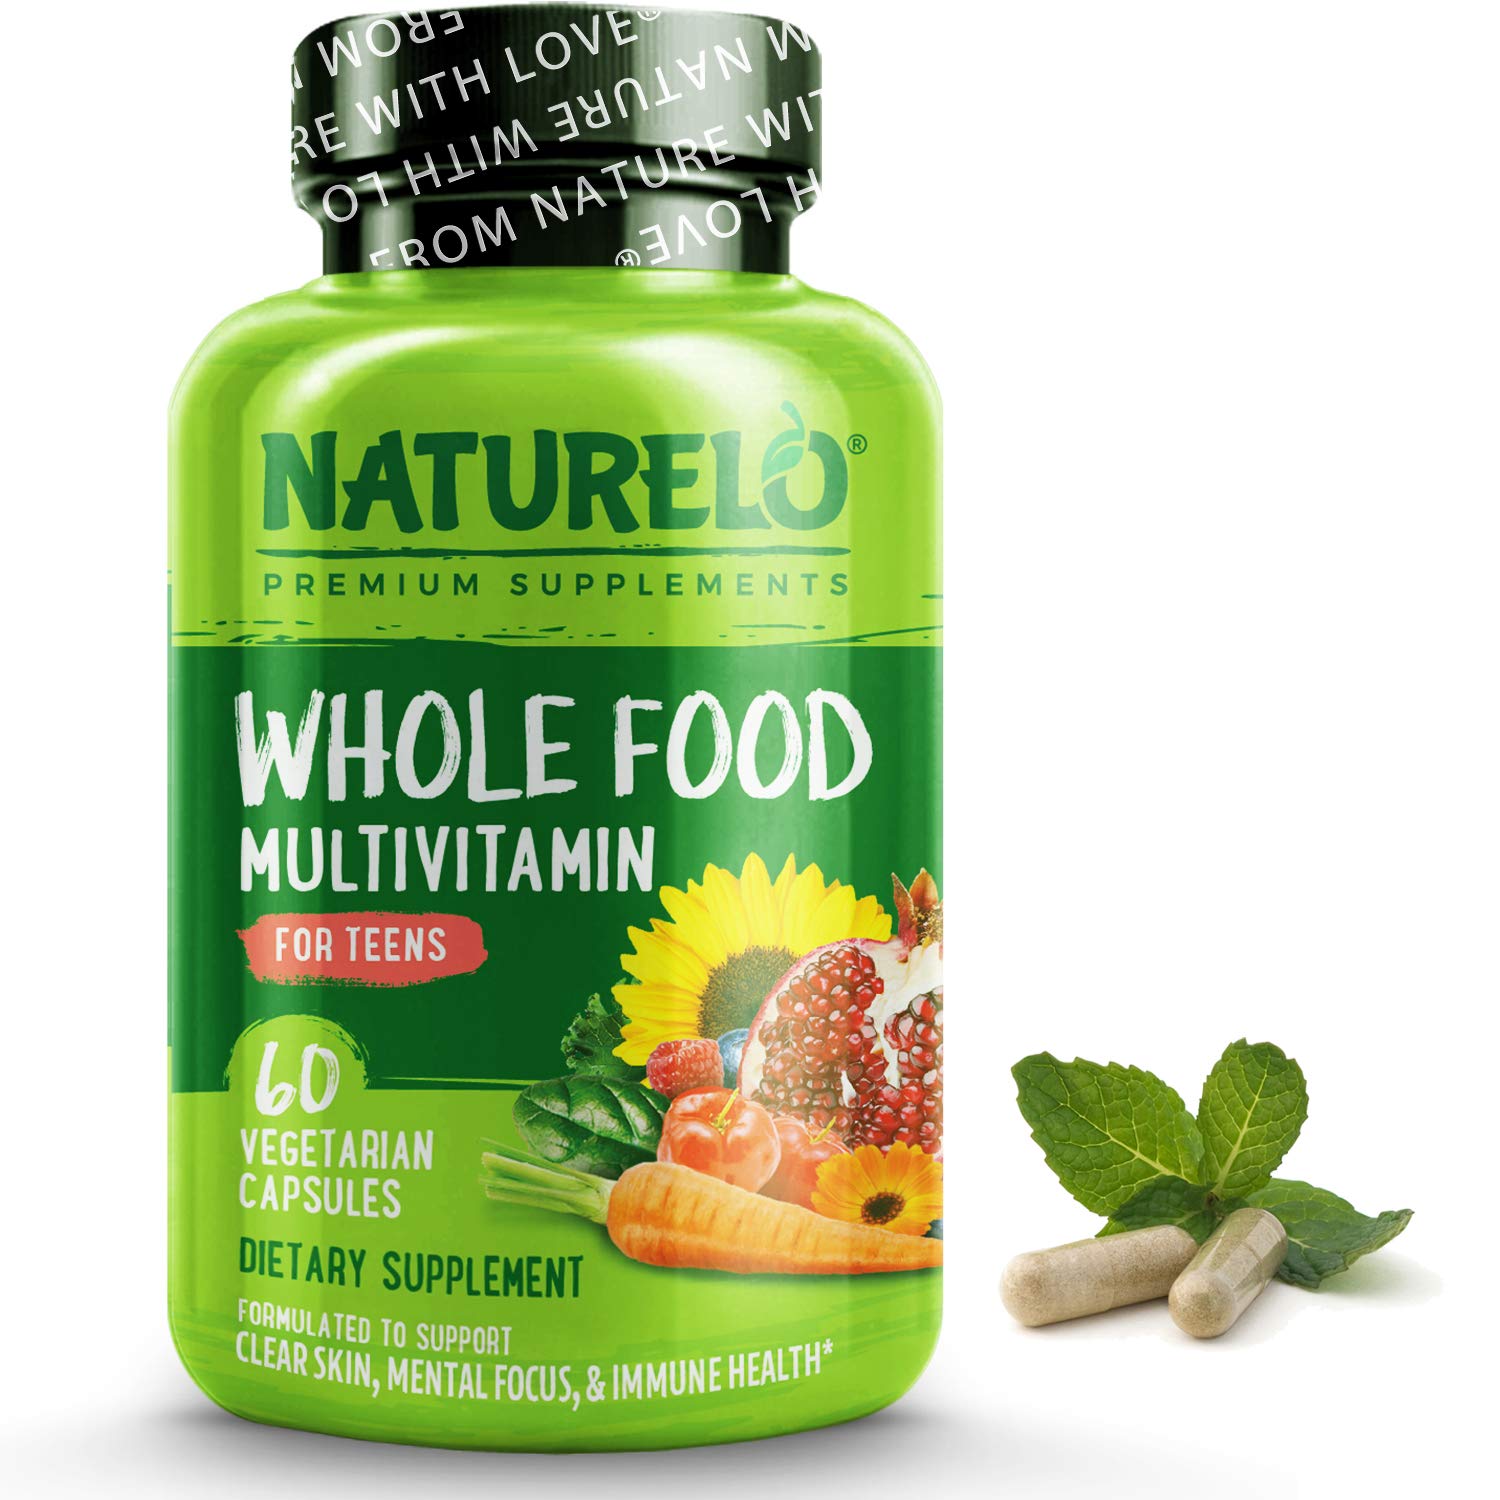 Book Cover NATURELO Whole Food Multivitamin for Teens - Vitamins and Minerals for Teenage Boys and Girls - Supplement for Active Kids - with Organic Whole Foods - Non-GMO - Vegan & Vegetarian - 60 Capsules 60.0 Servings (Pack of 1)